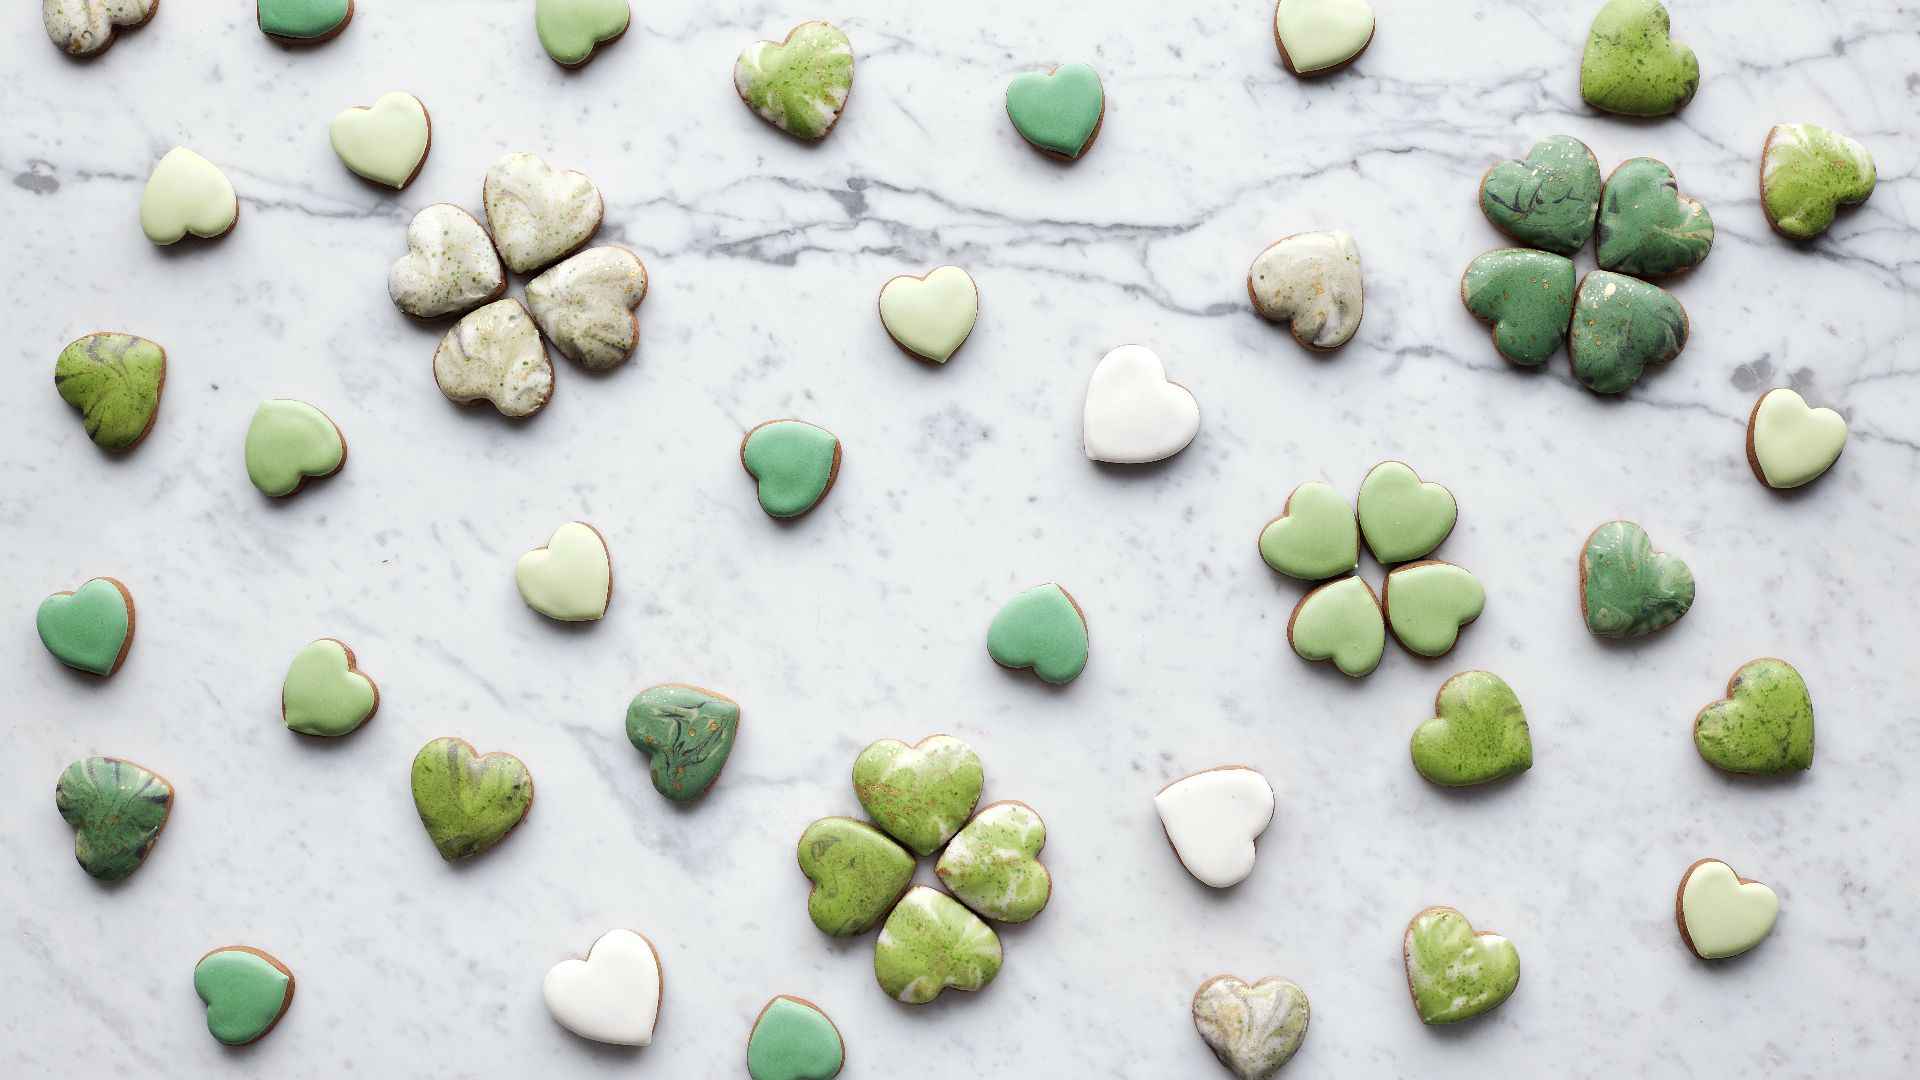 heart shaped cookies with green and white icing on a marble table